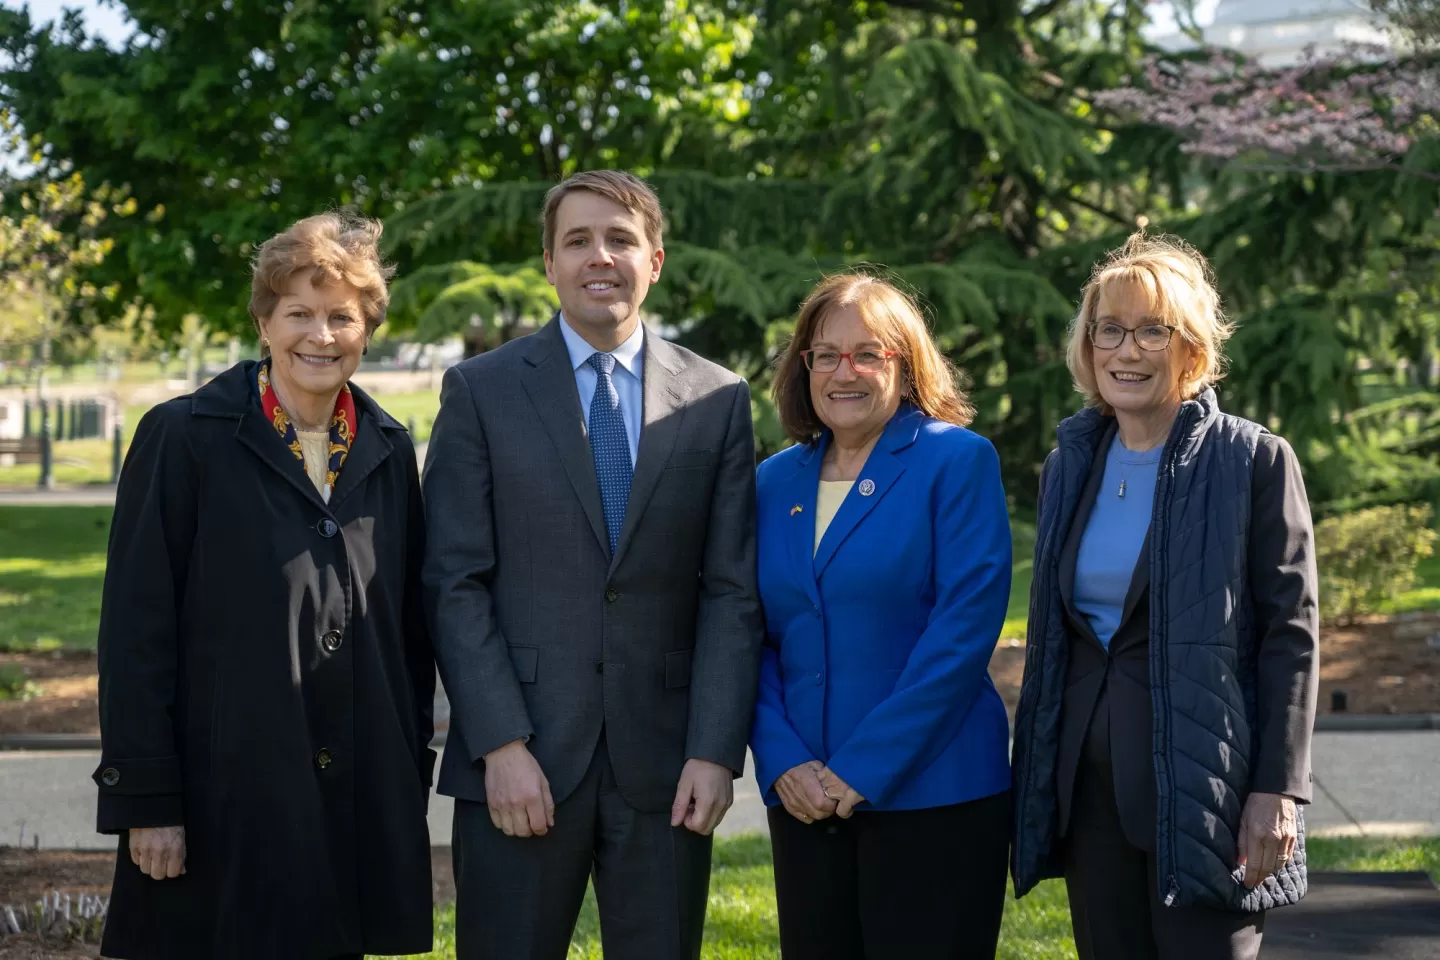 New Hampshire Congressional Delegation at the tree dedication ceremony on April 28, 2022.